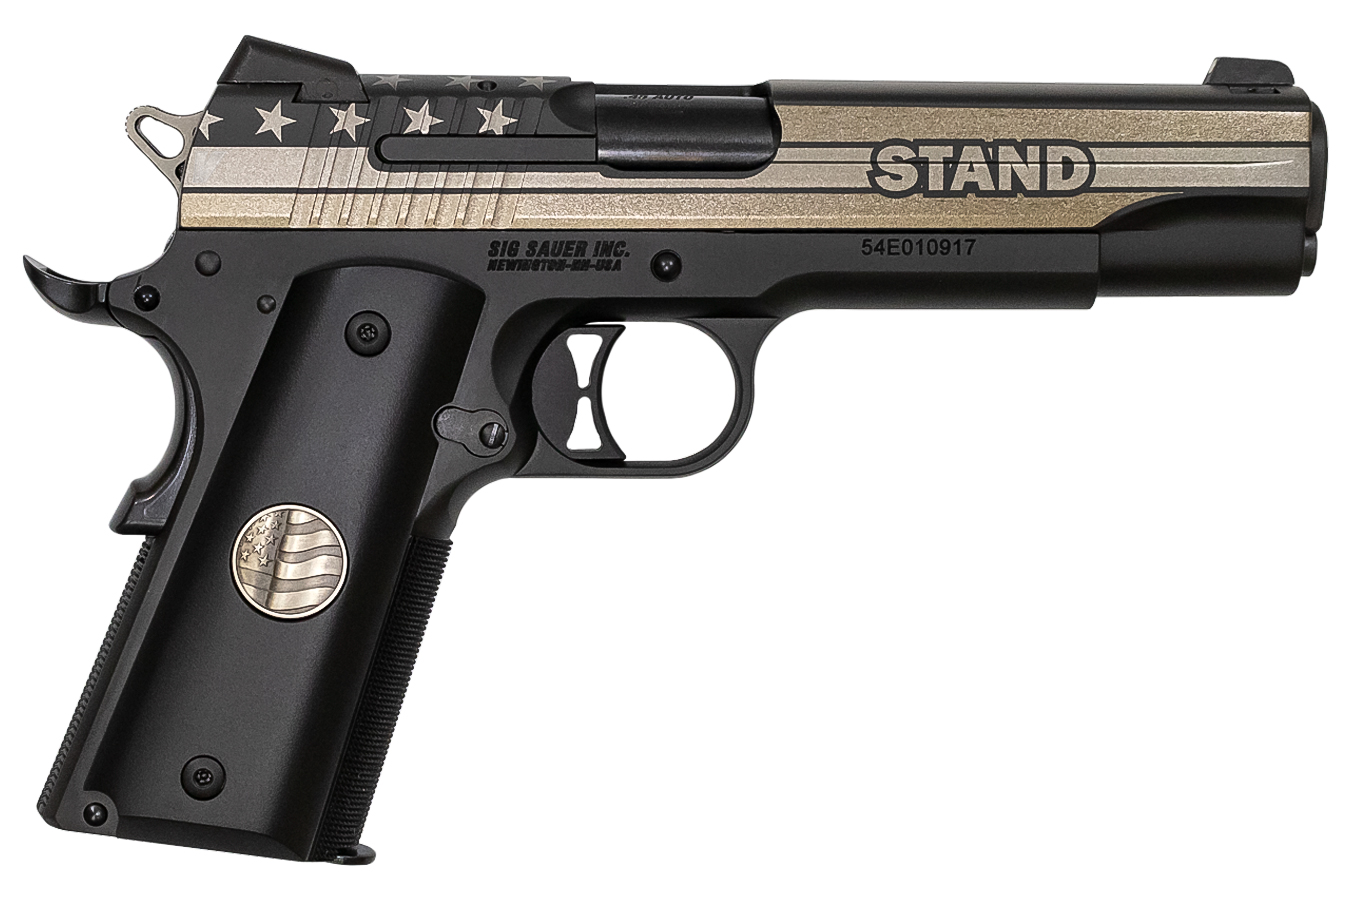 SIG SAUER 1911 STAND 45 ACP PISTOL WITH NIGHT SIGHTS